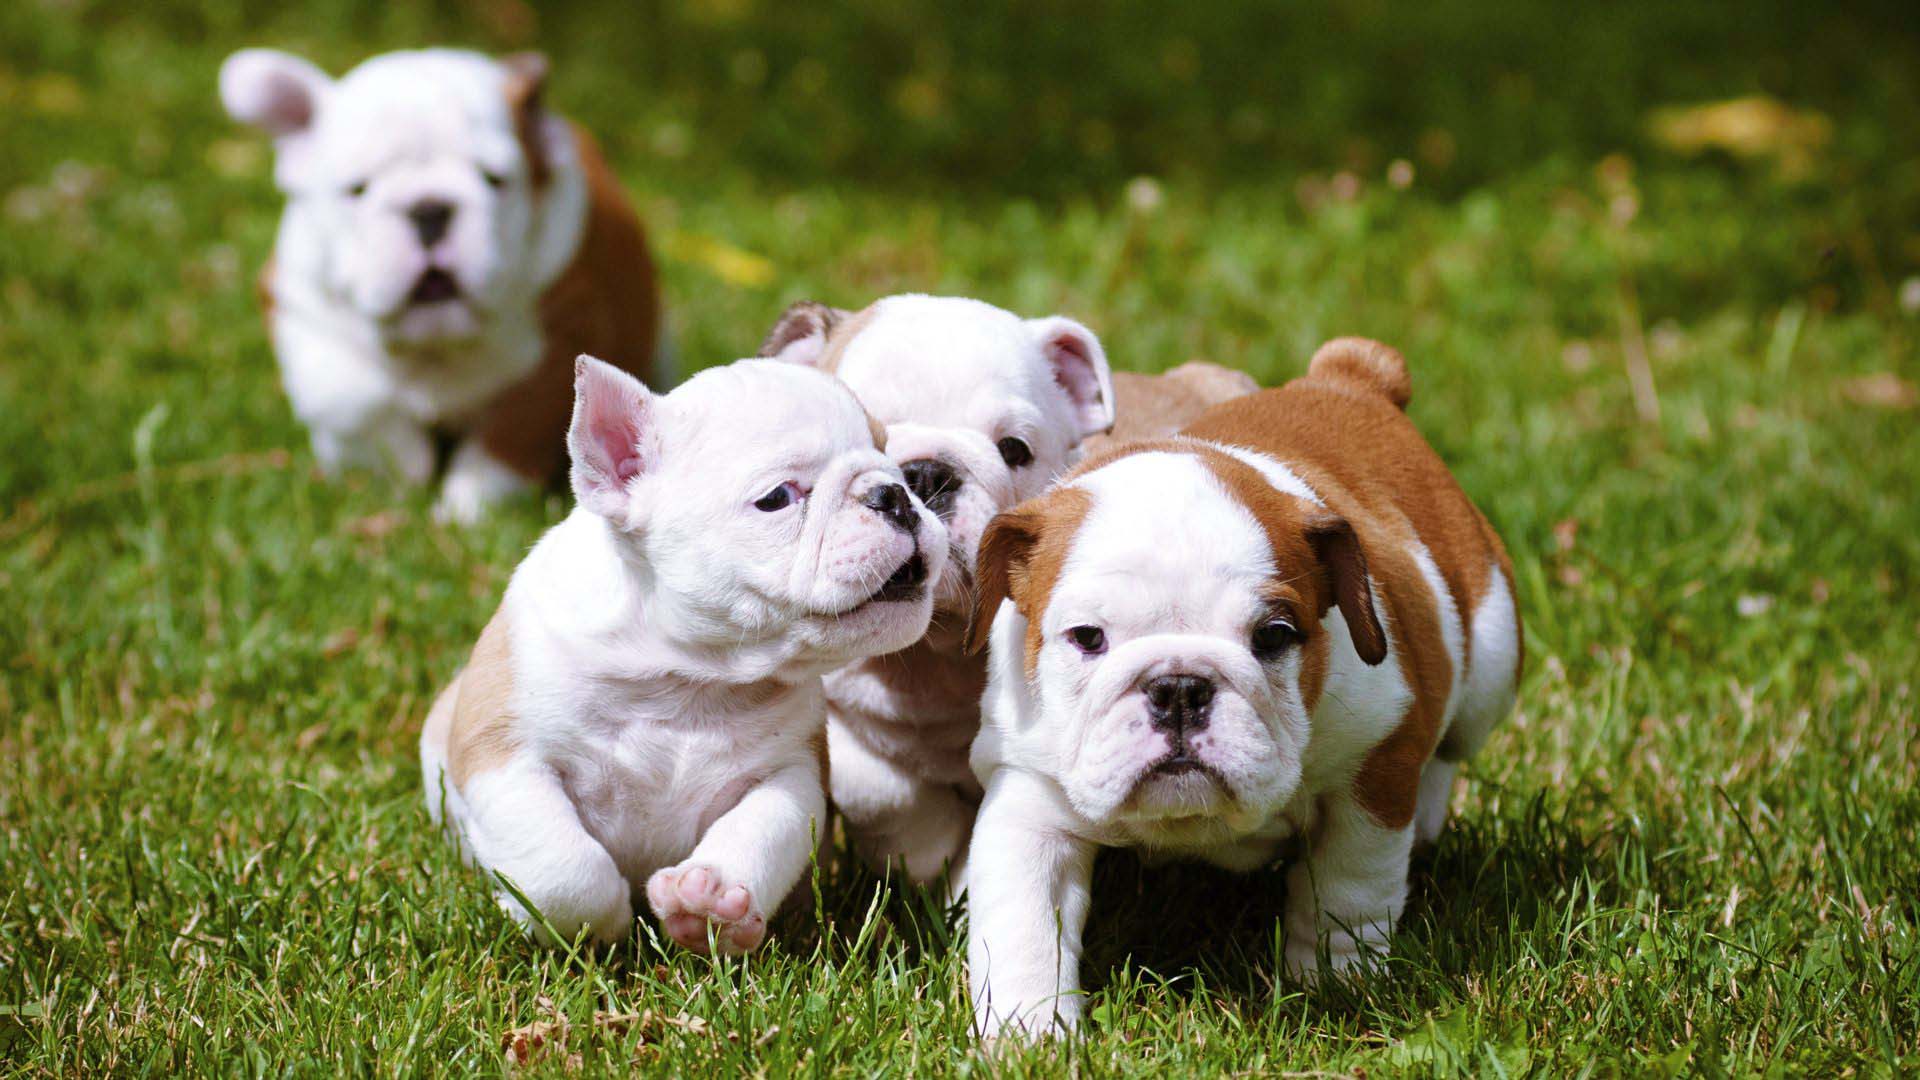 Bulldog Puppies Running Together Wallpaper HD With